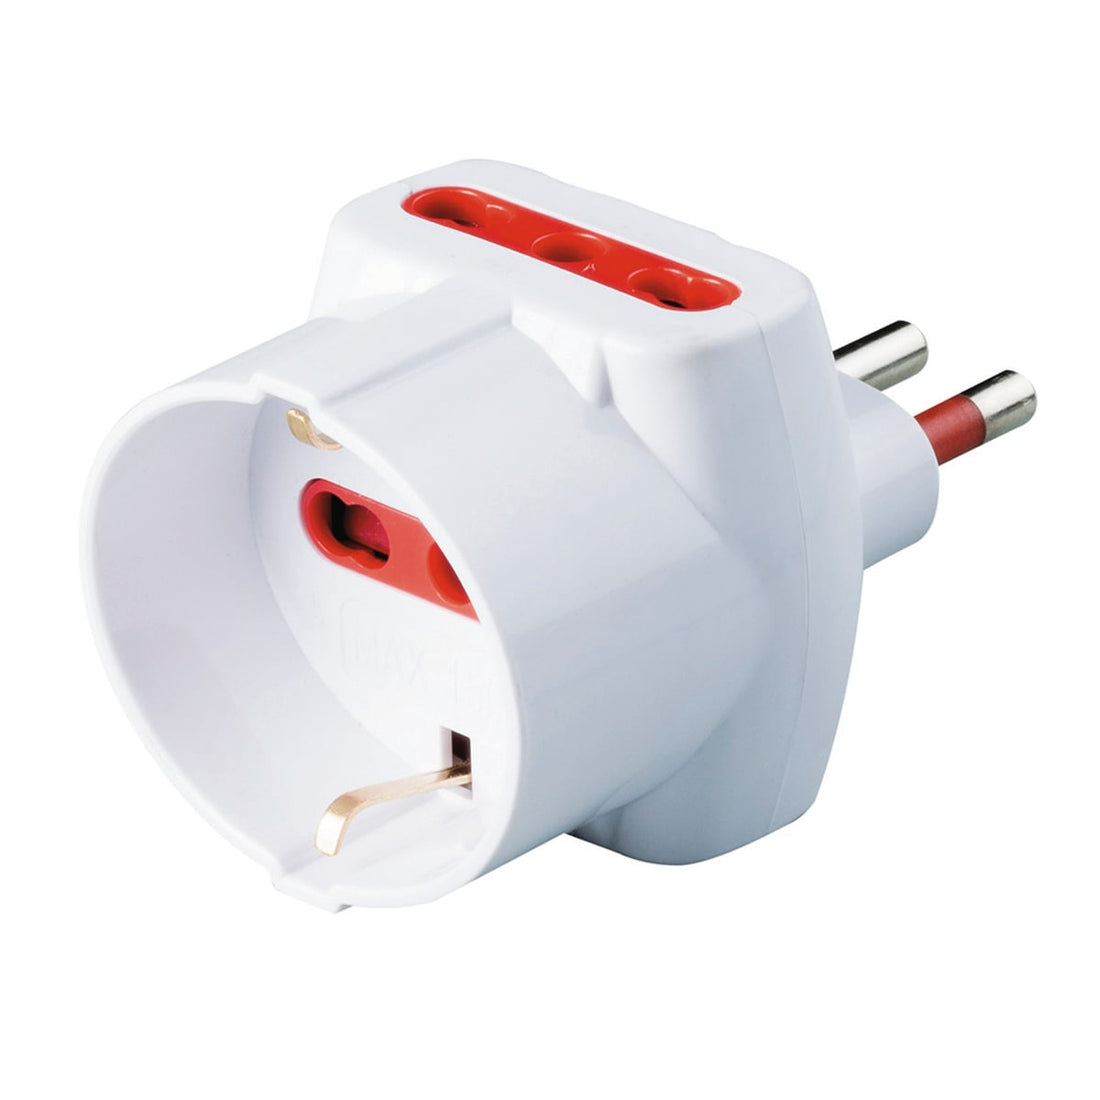 ADAPTER PLUG 10A 2 SOCKETS 10/16A 1 UNIVERSAL WITH SELF-RESETTING LIMITER WHITE